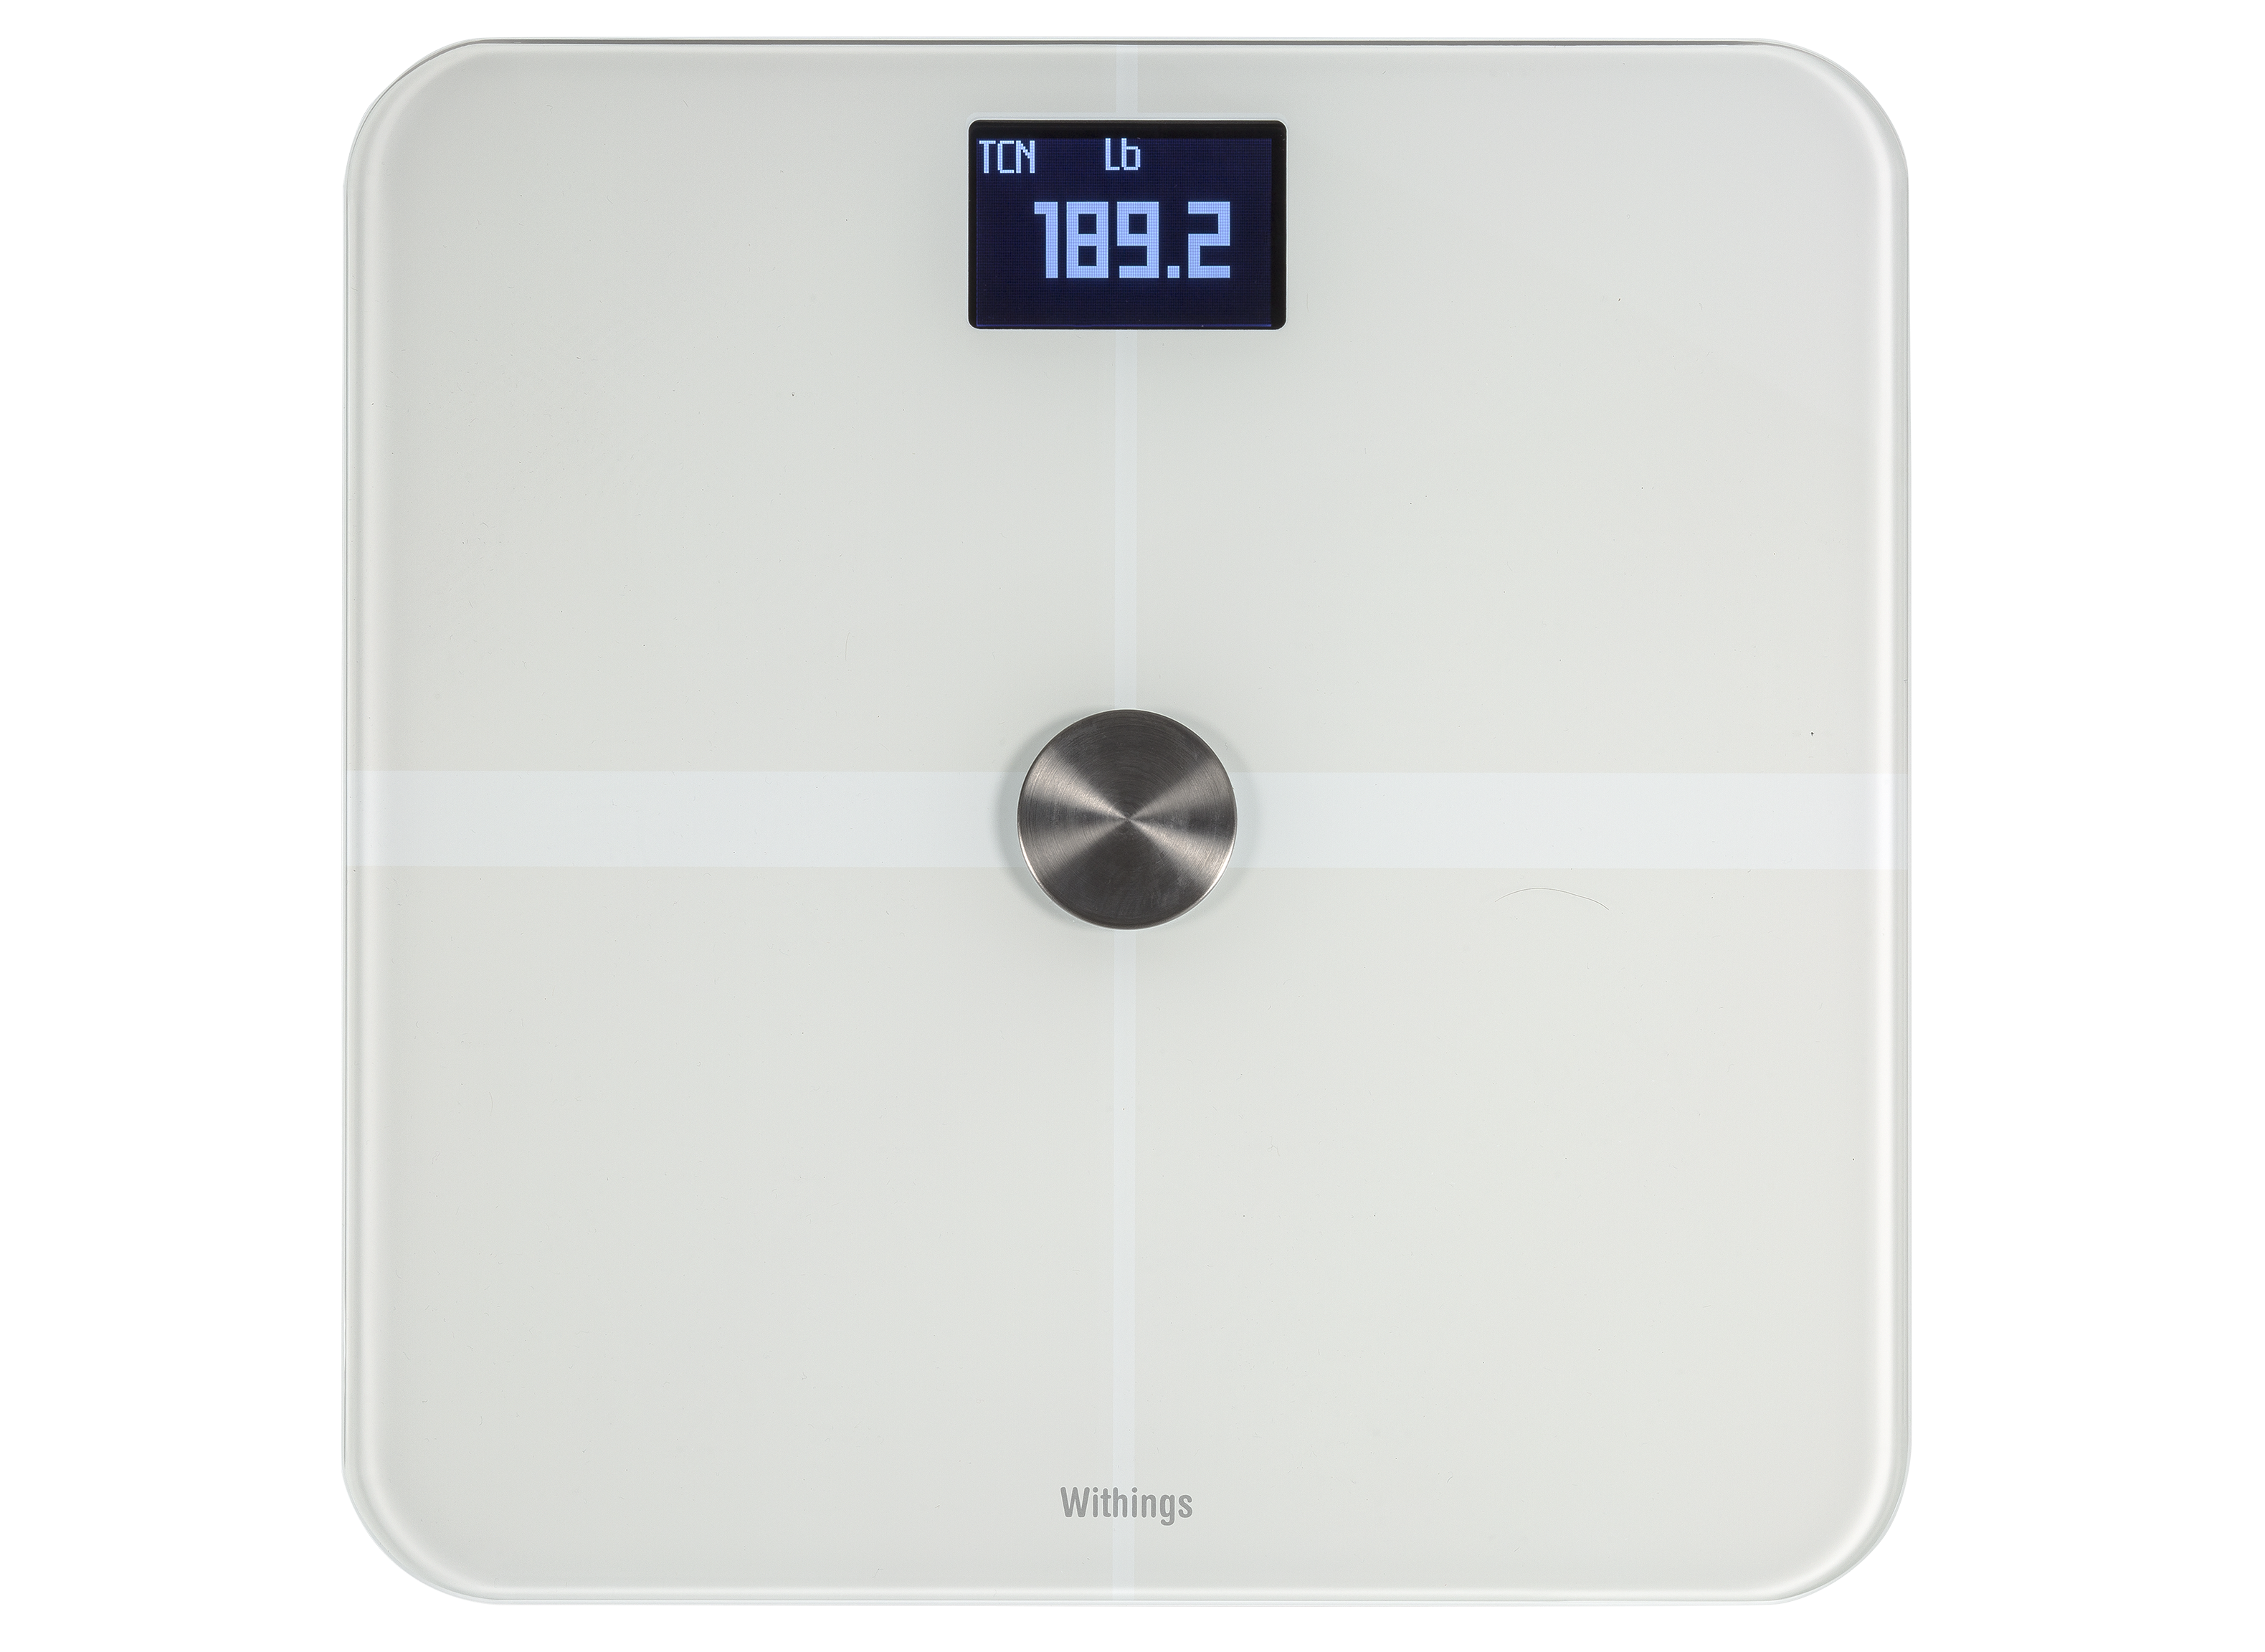 Withings WS-50 Bathroom Scale Review - Consumer Reports